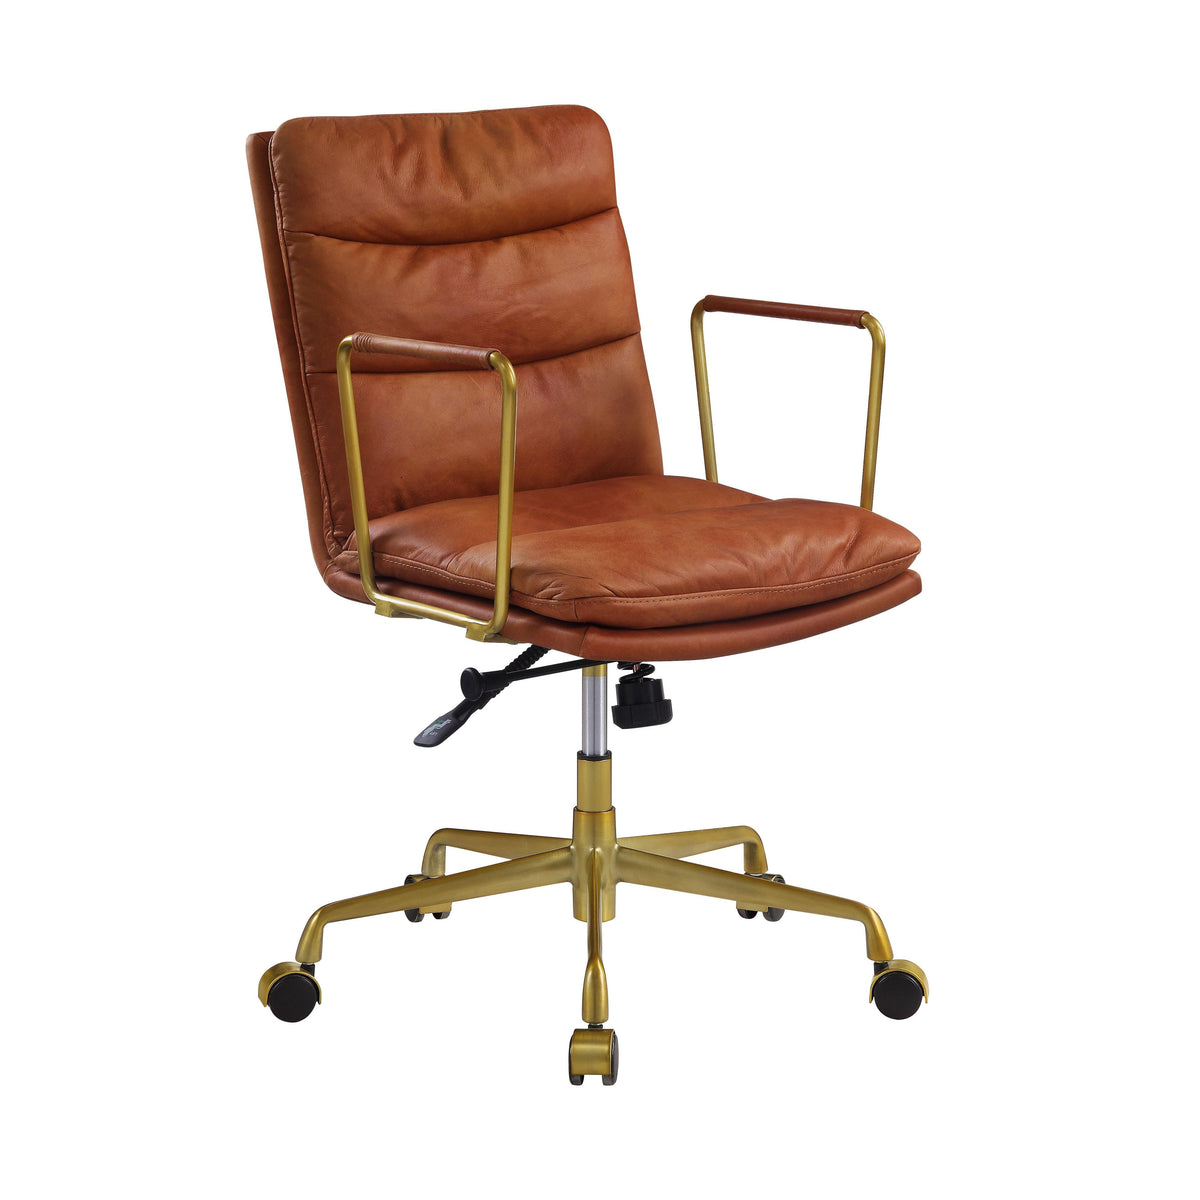 Acme Furniture Dudley 92498 Executive Office Chair - Rust